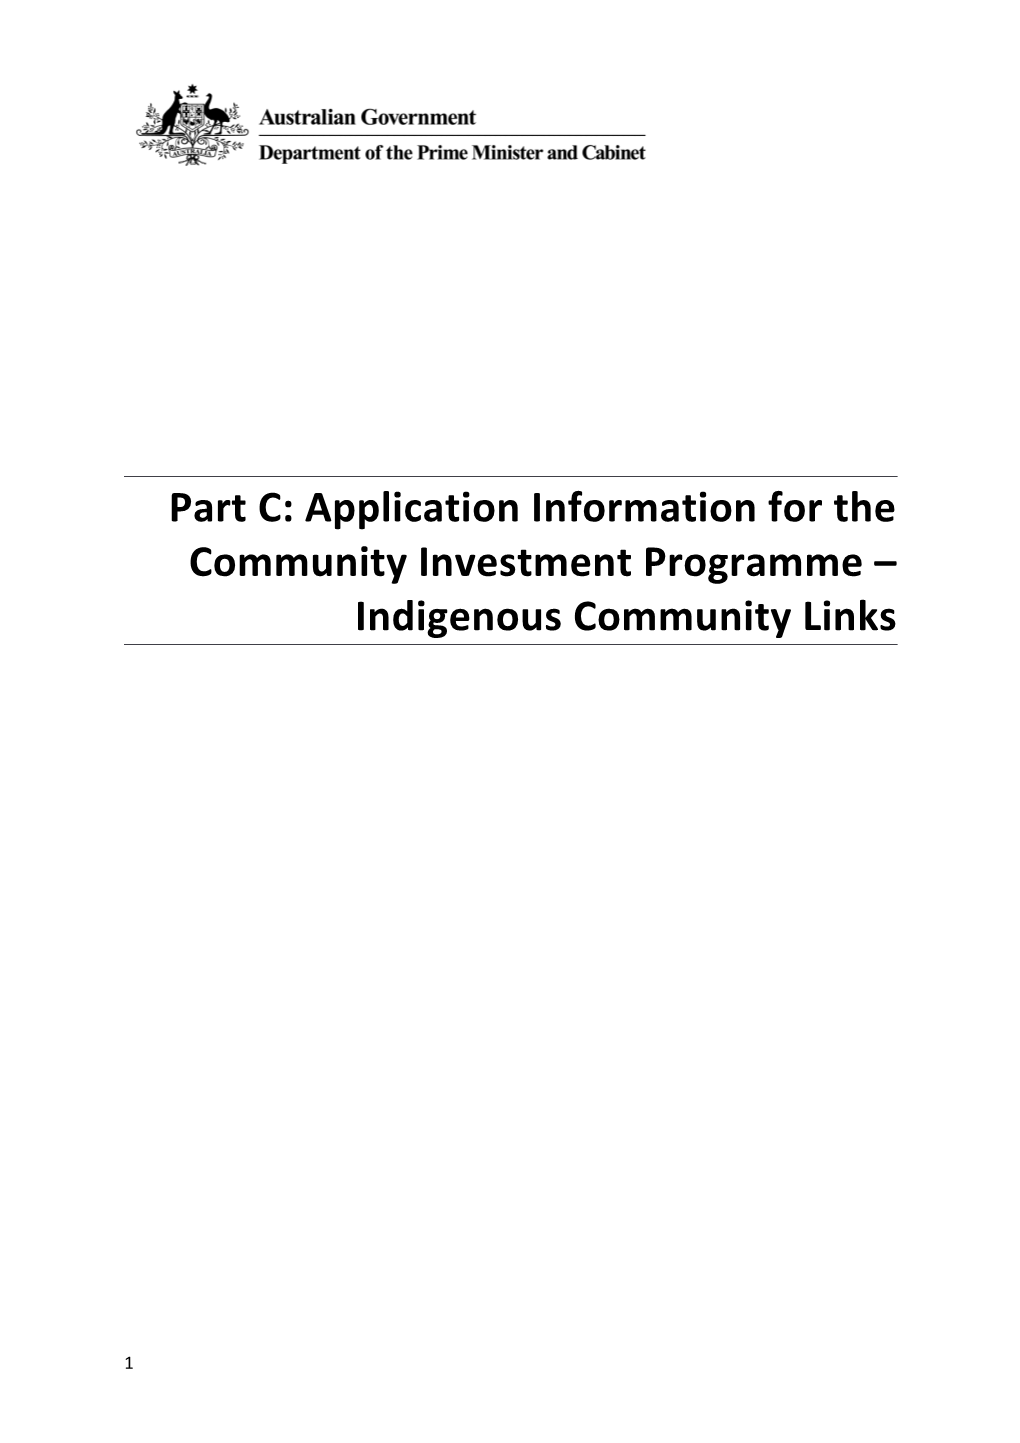 Part C: Application Information for the Community Investment Programme Indigenous Community